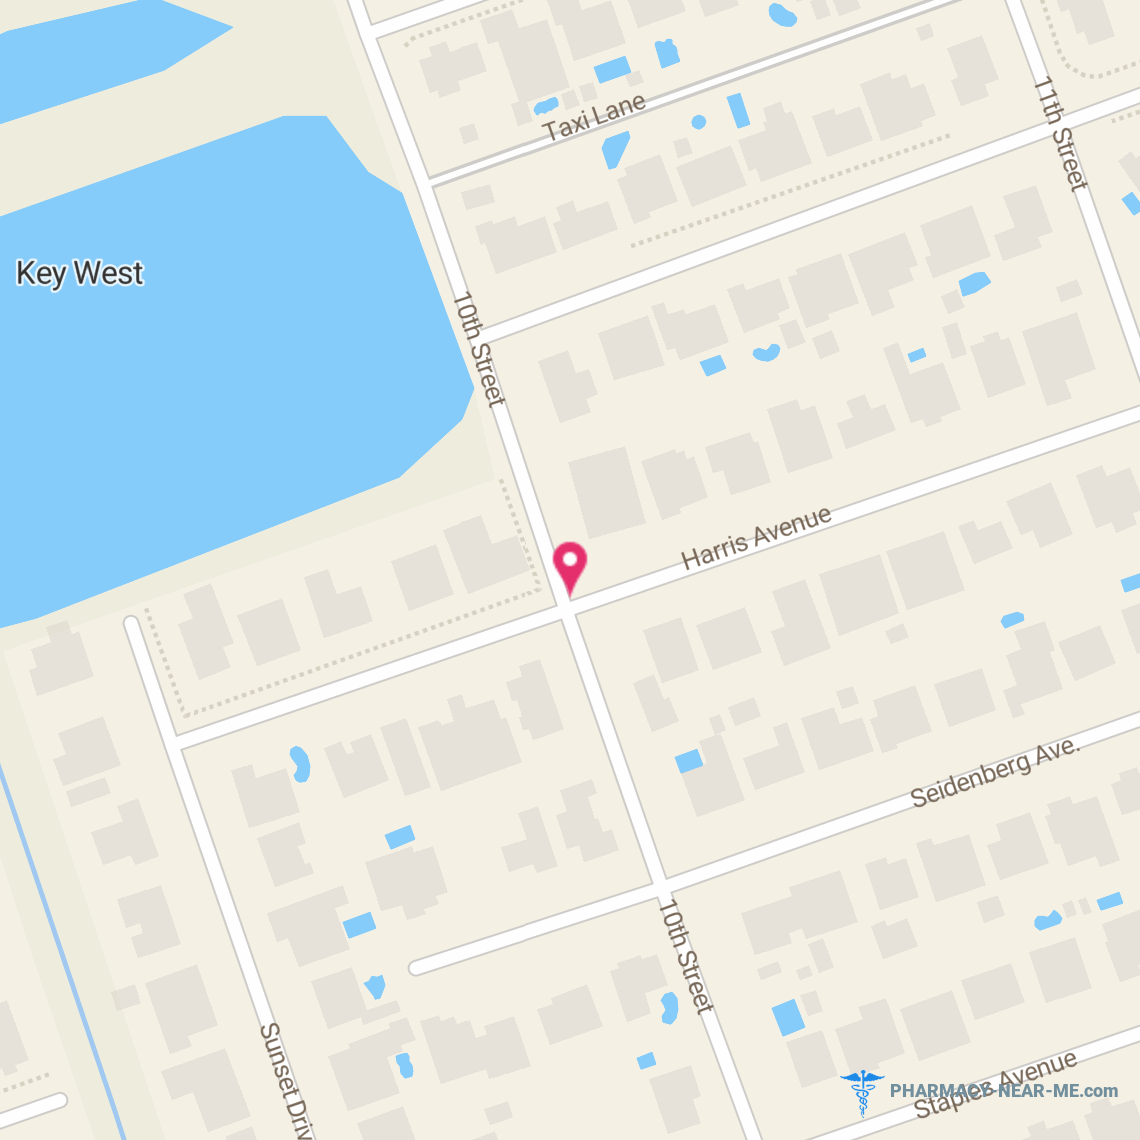 JOSE LUIS ALONSO - Pharmacy Hours, Phone, Reviews & Information: 2803 Harris Avenue, Key West, Florida 33040, United States